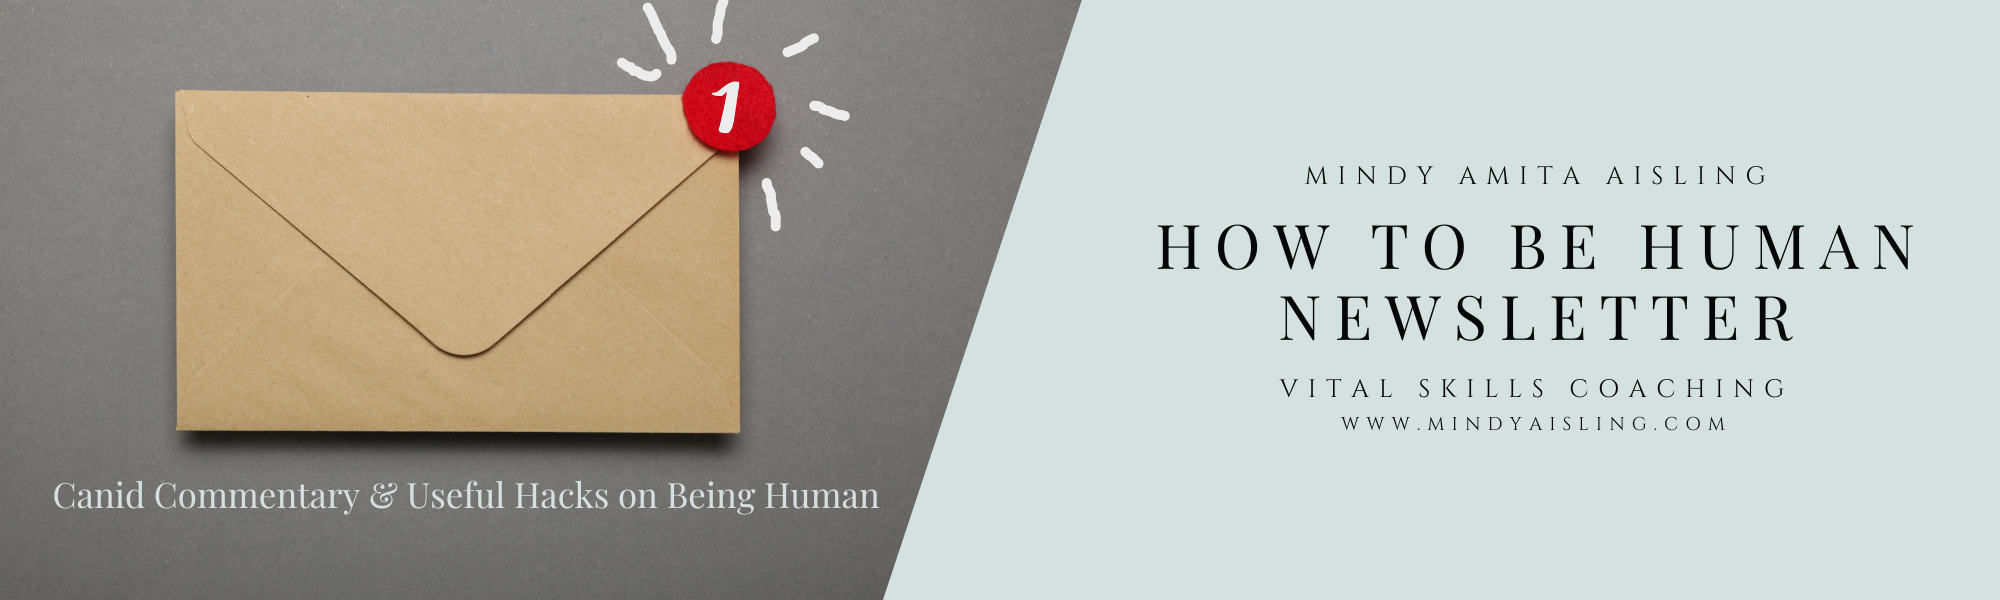 How To Be Human Newsletter